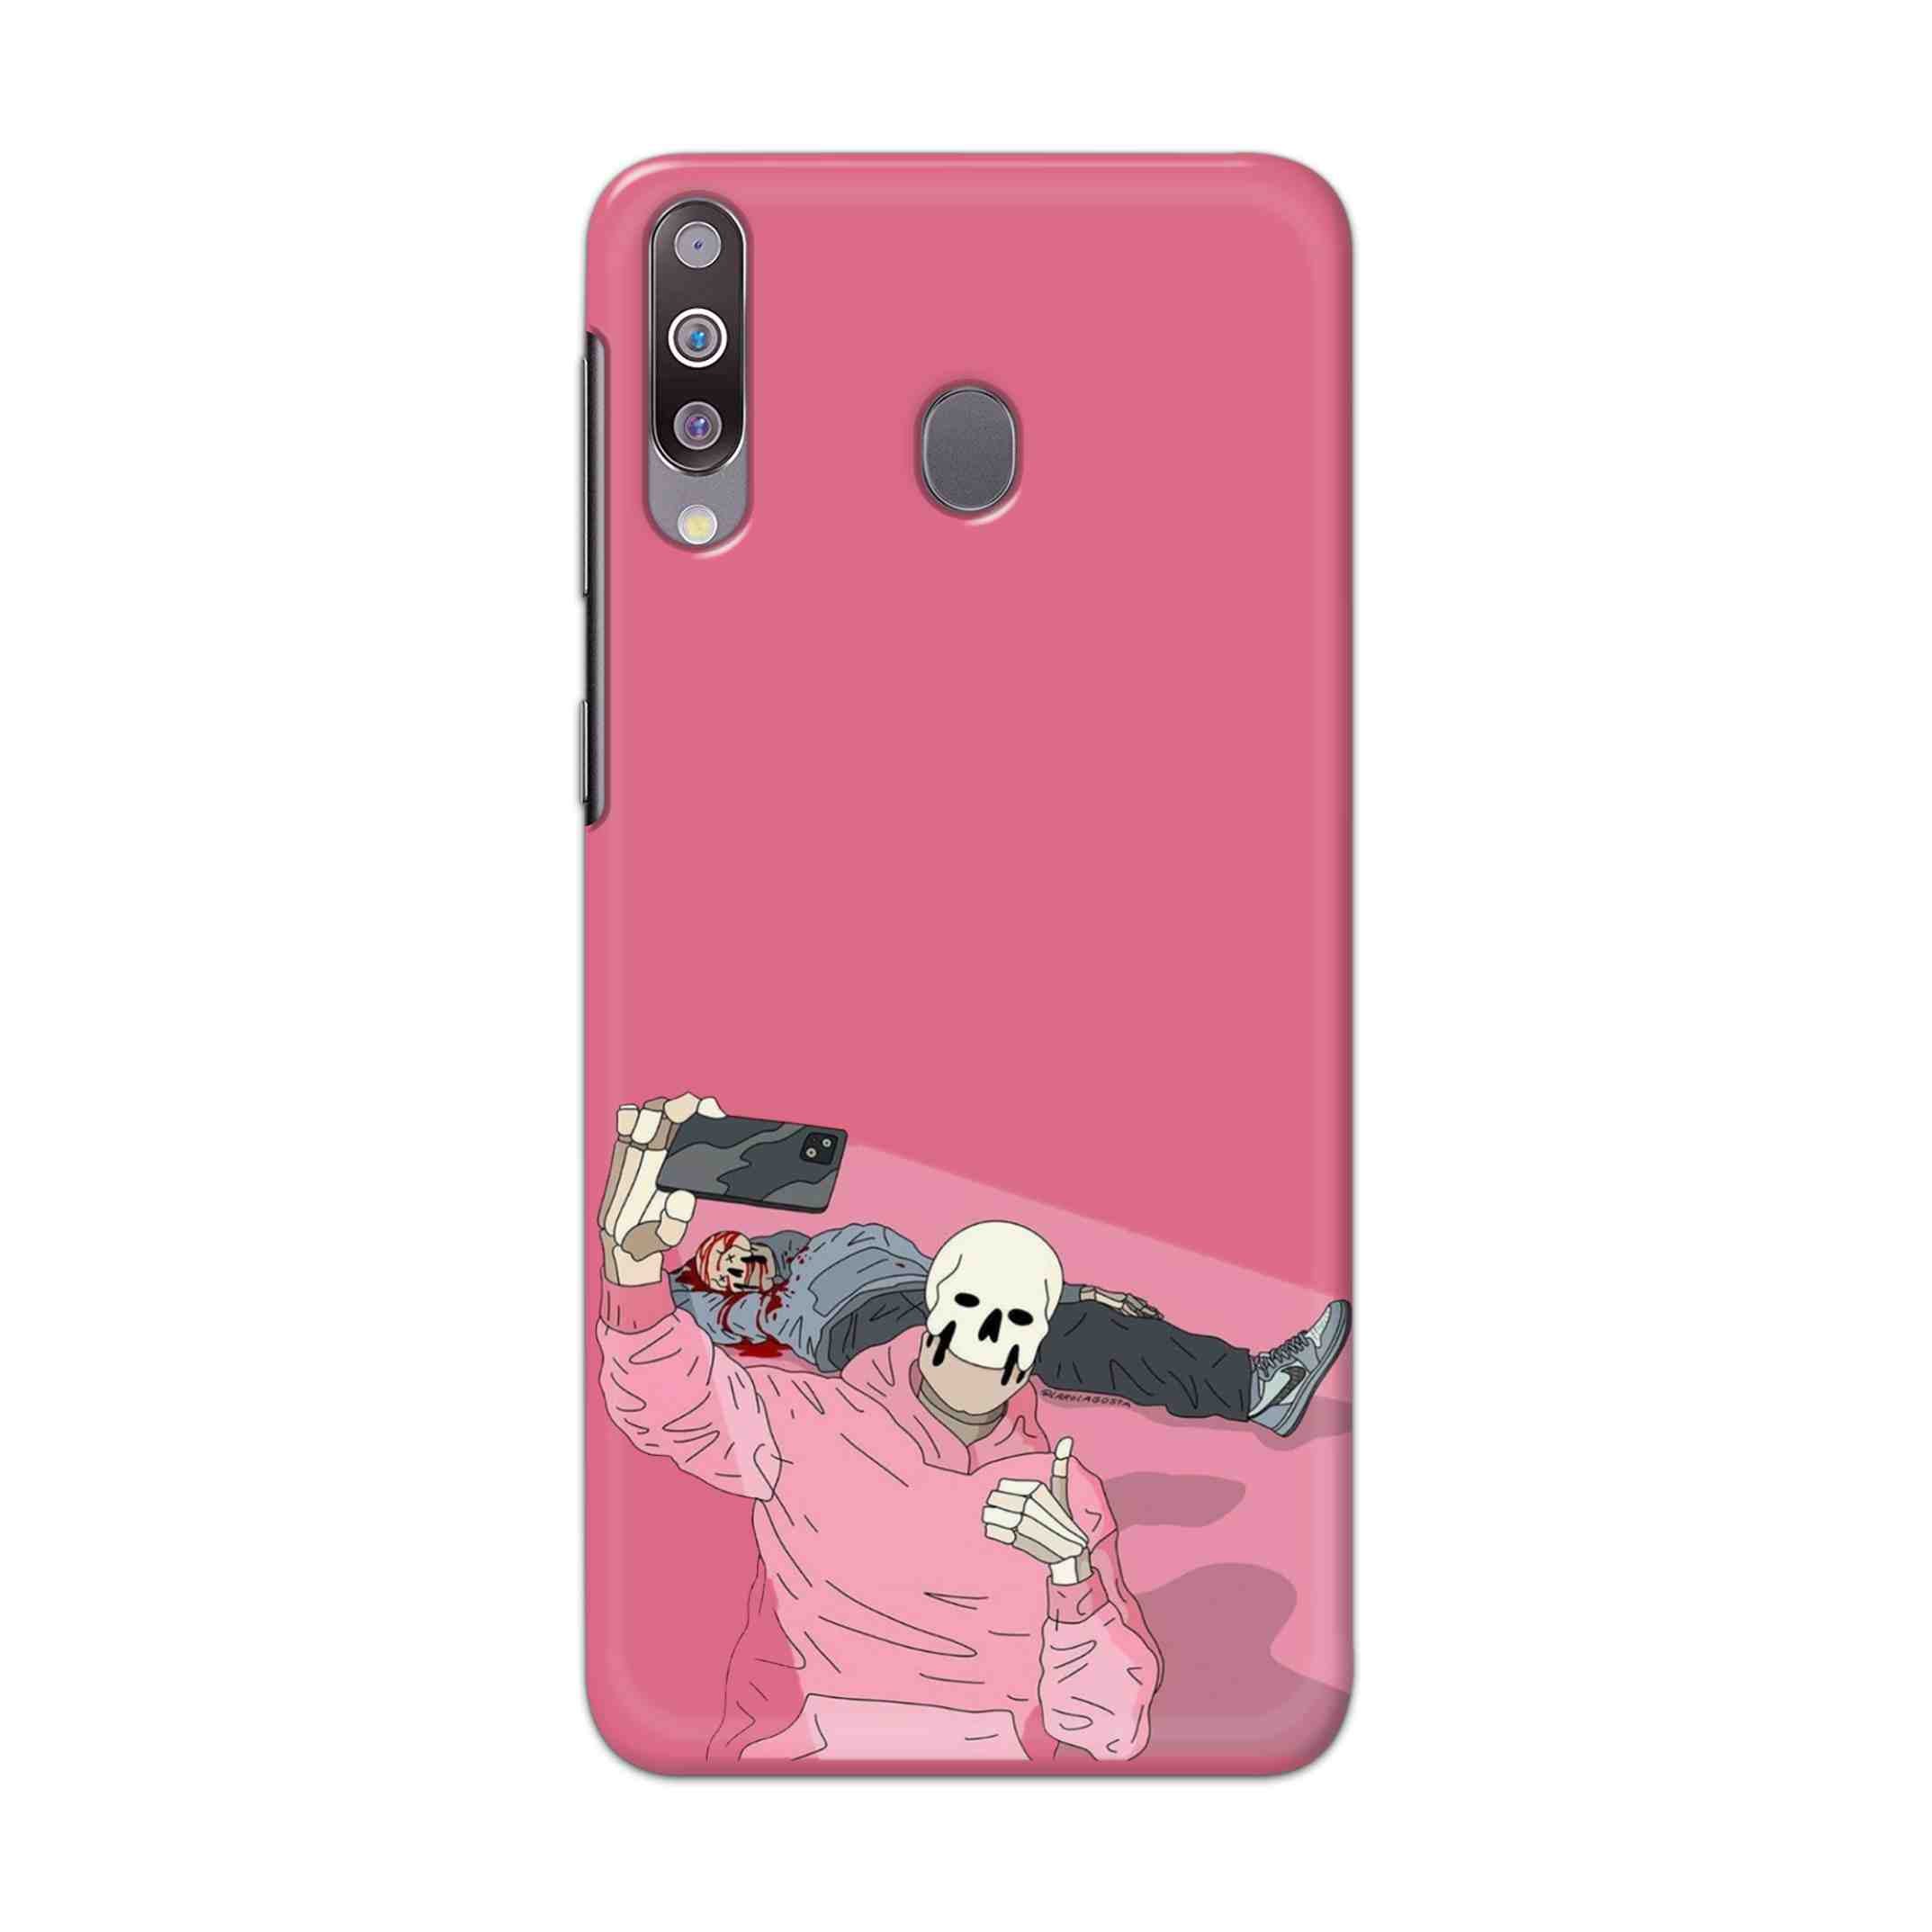 Buy Selfie Hard Back Mobile Phone Case Cover For Samsung Galaxy M30 Online